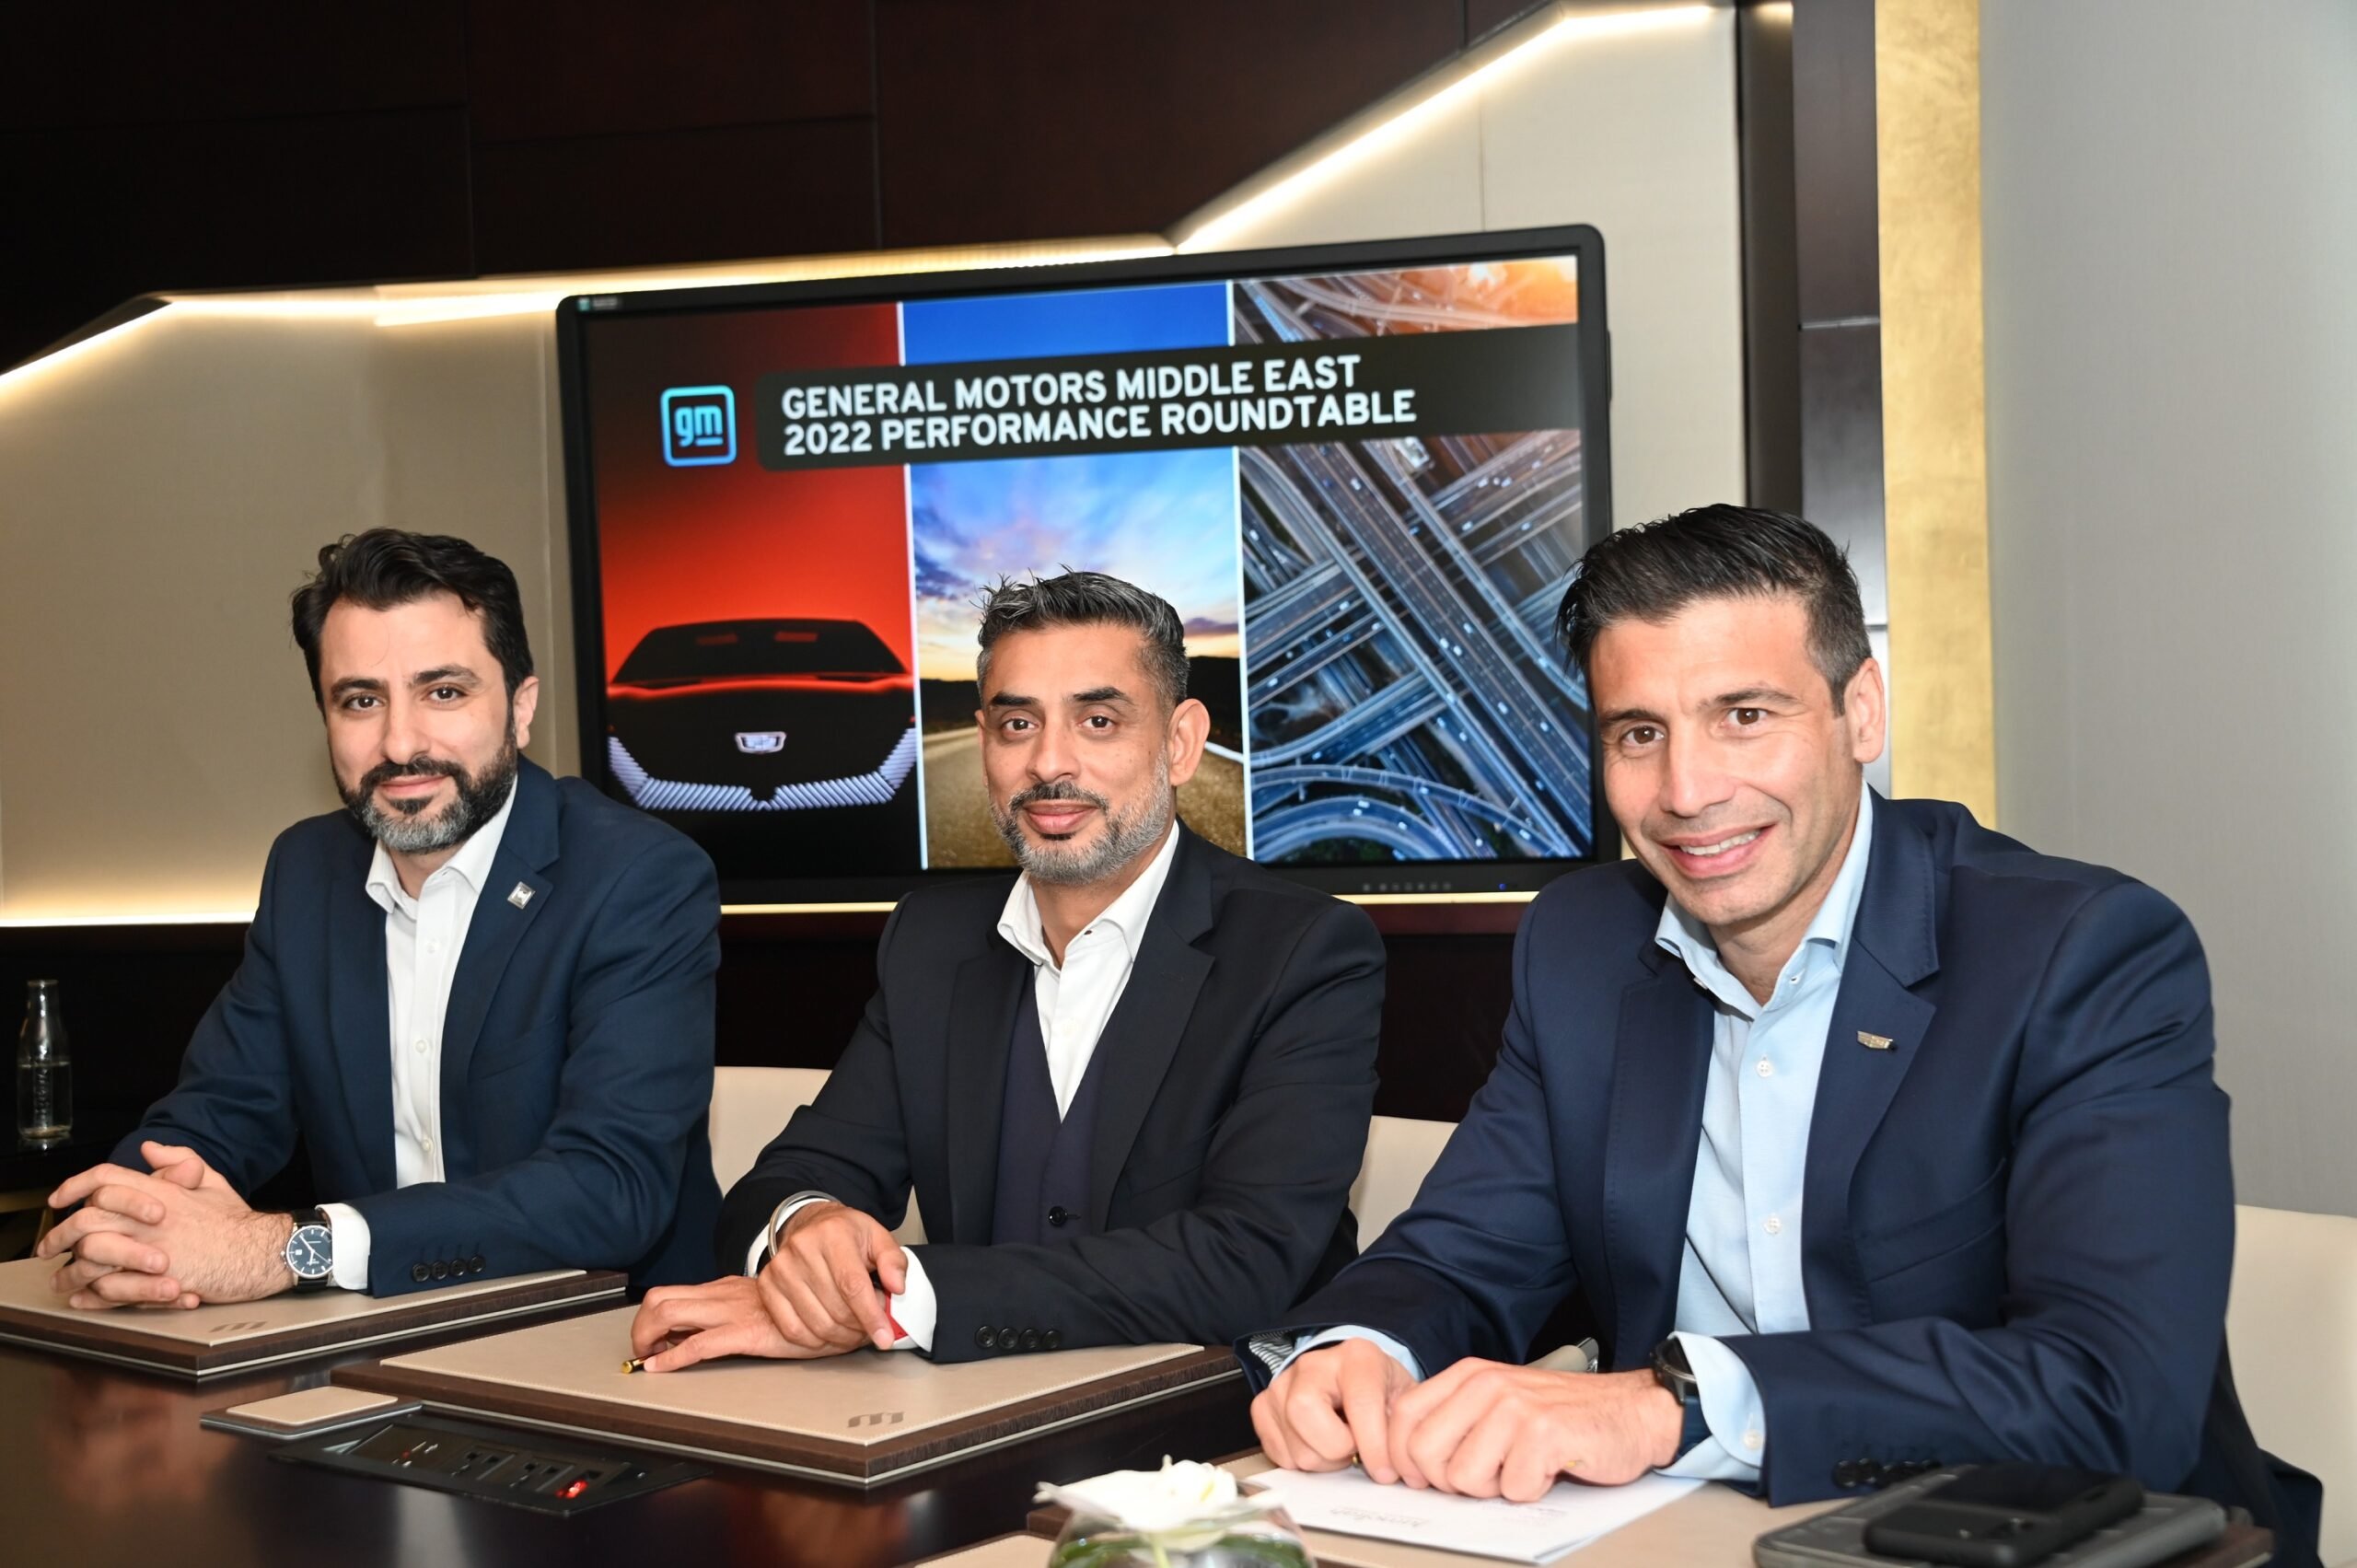 General Motors Middle East Celebrates 20% Increase in 2022 Sales compared to 2021